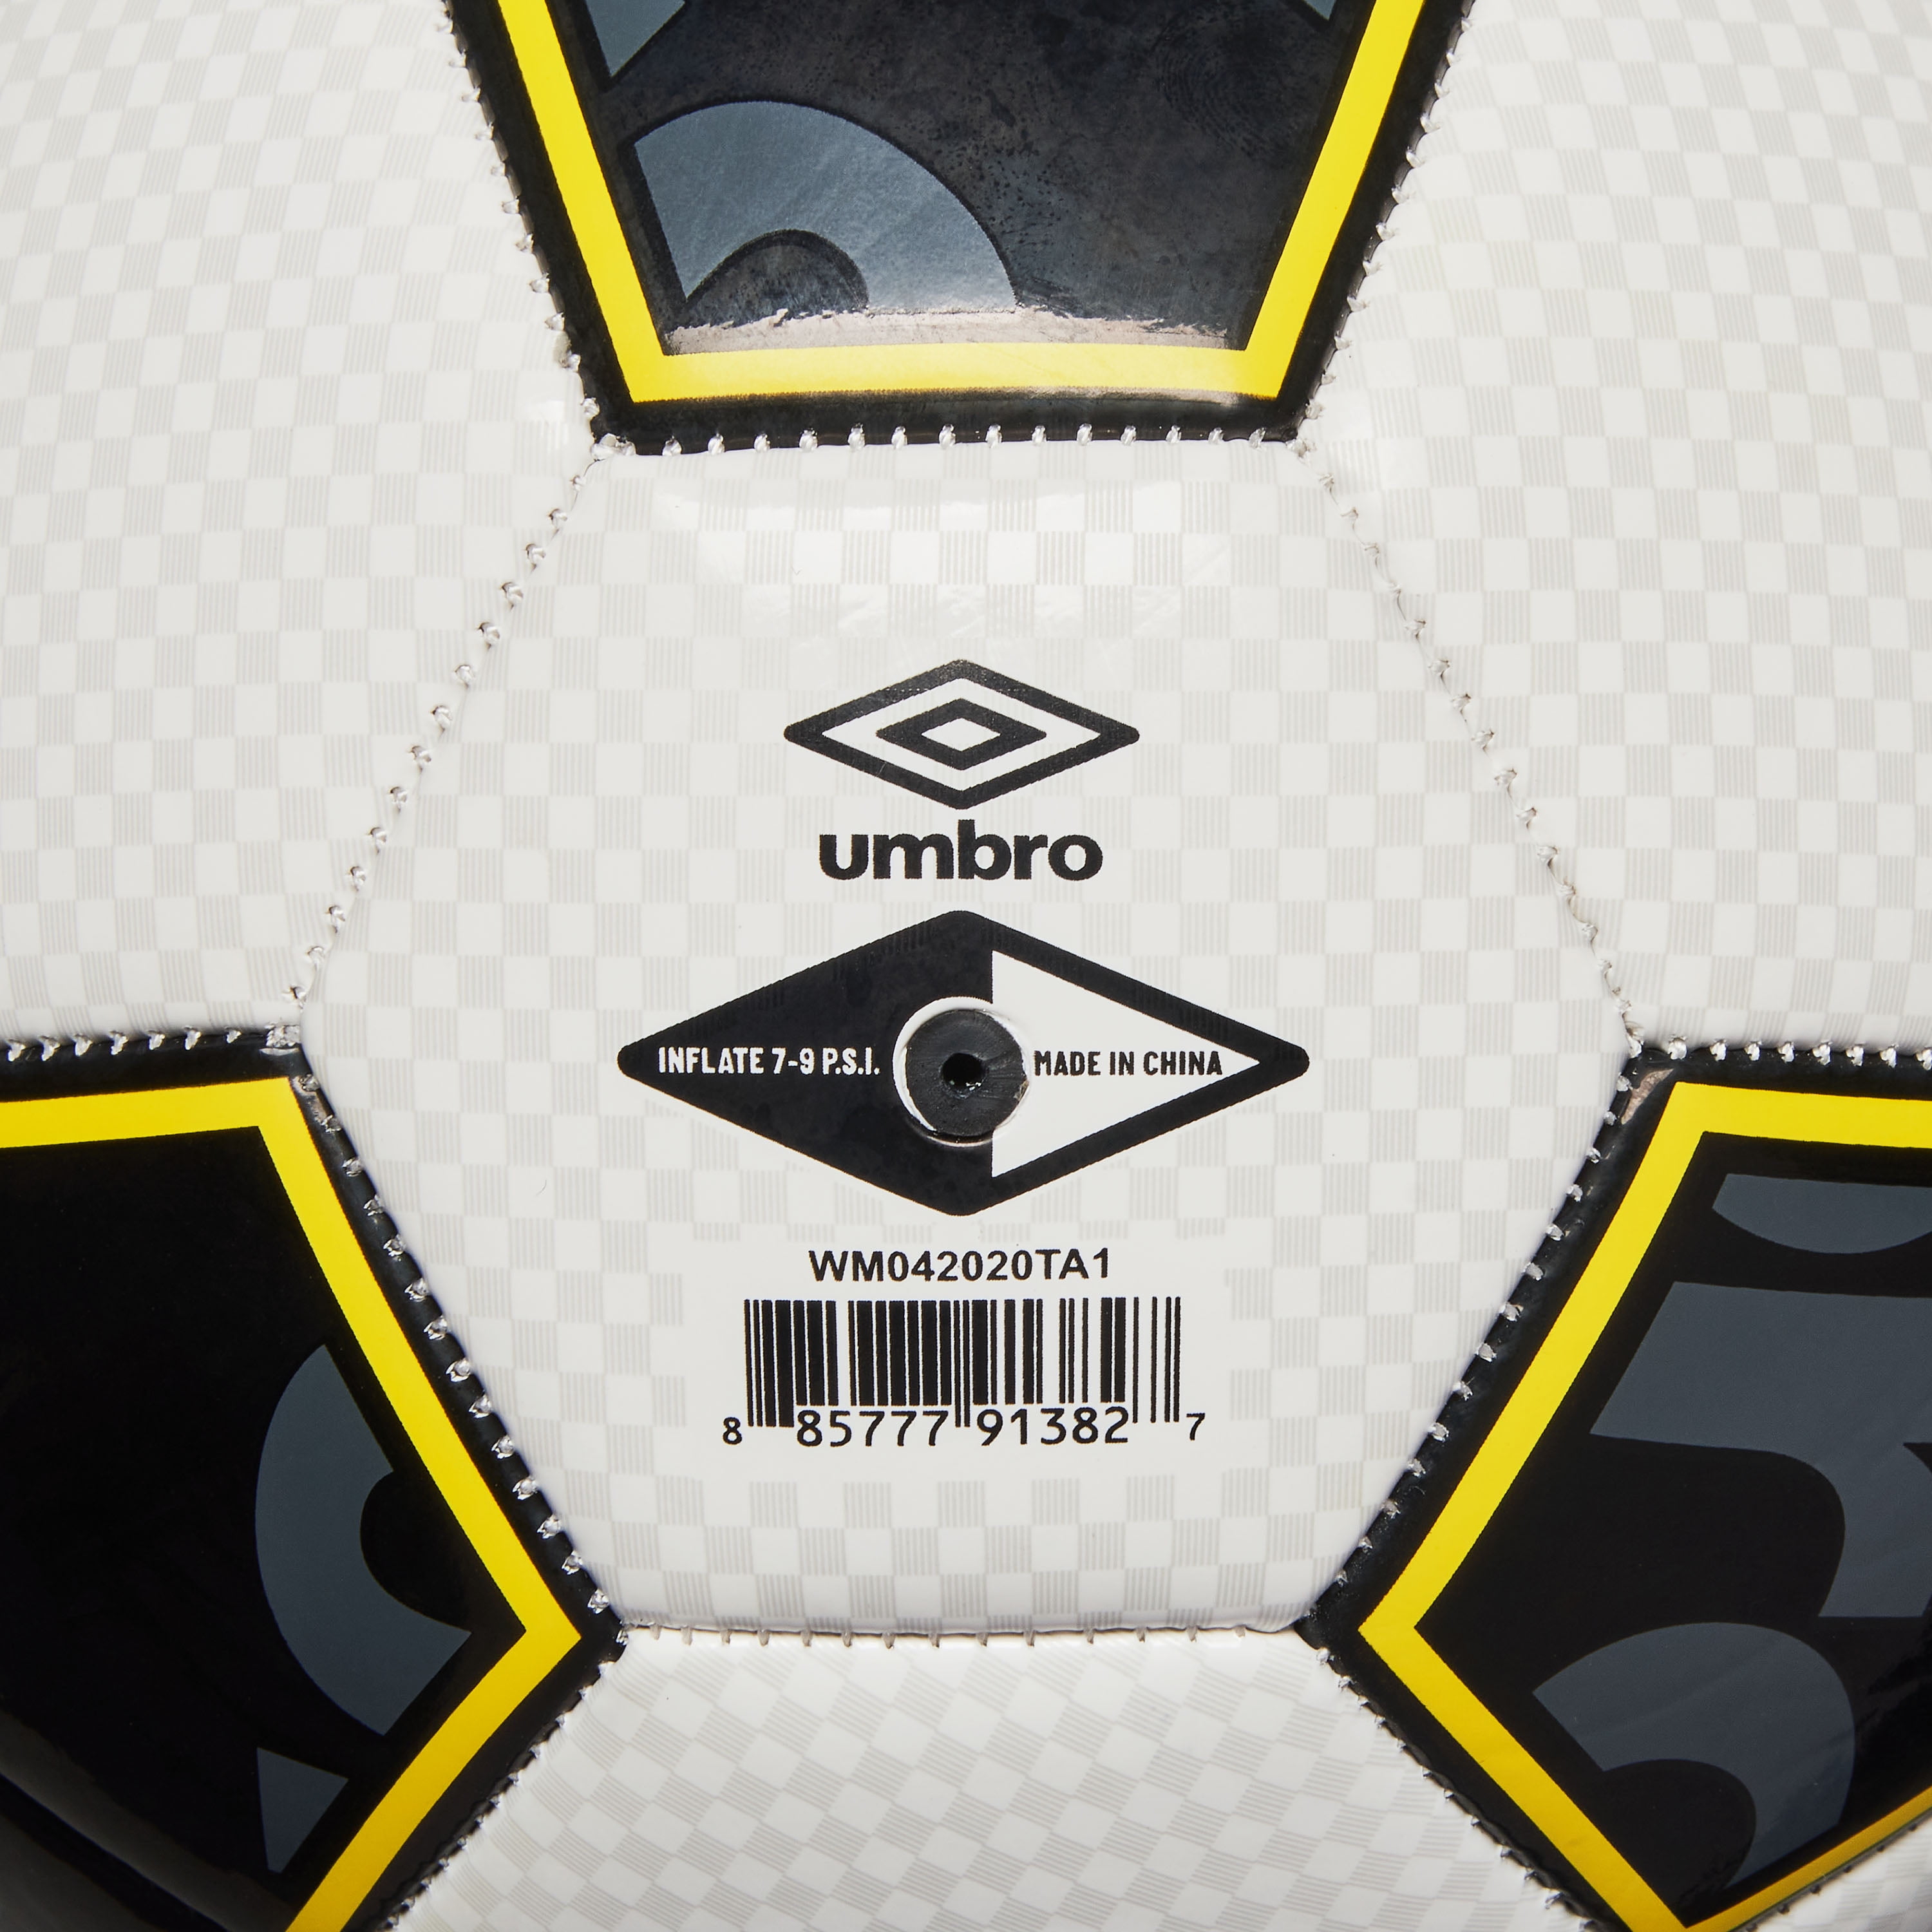 Umbro Soccer Ball Size 5 in Black, White, and Gold - Walmart.com